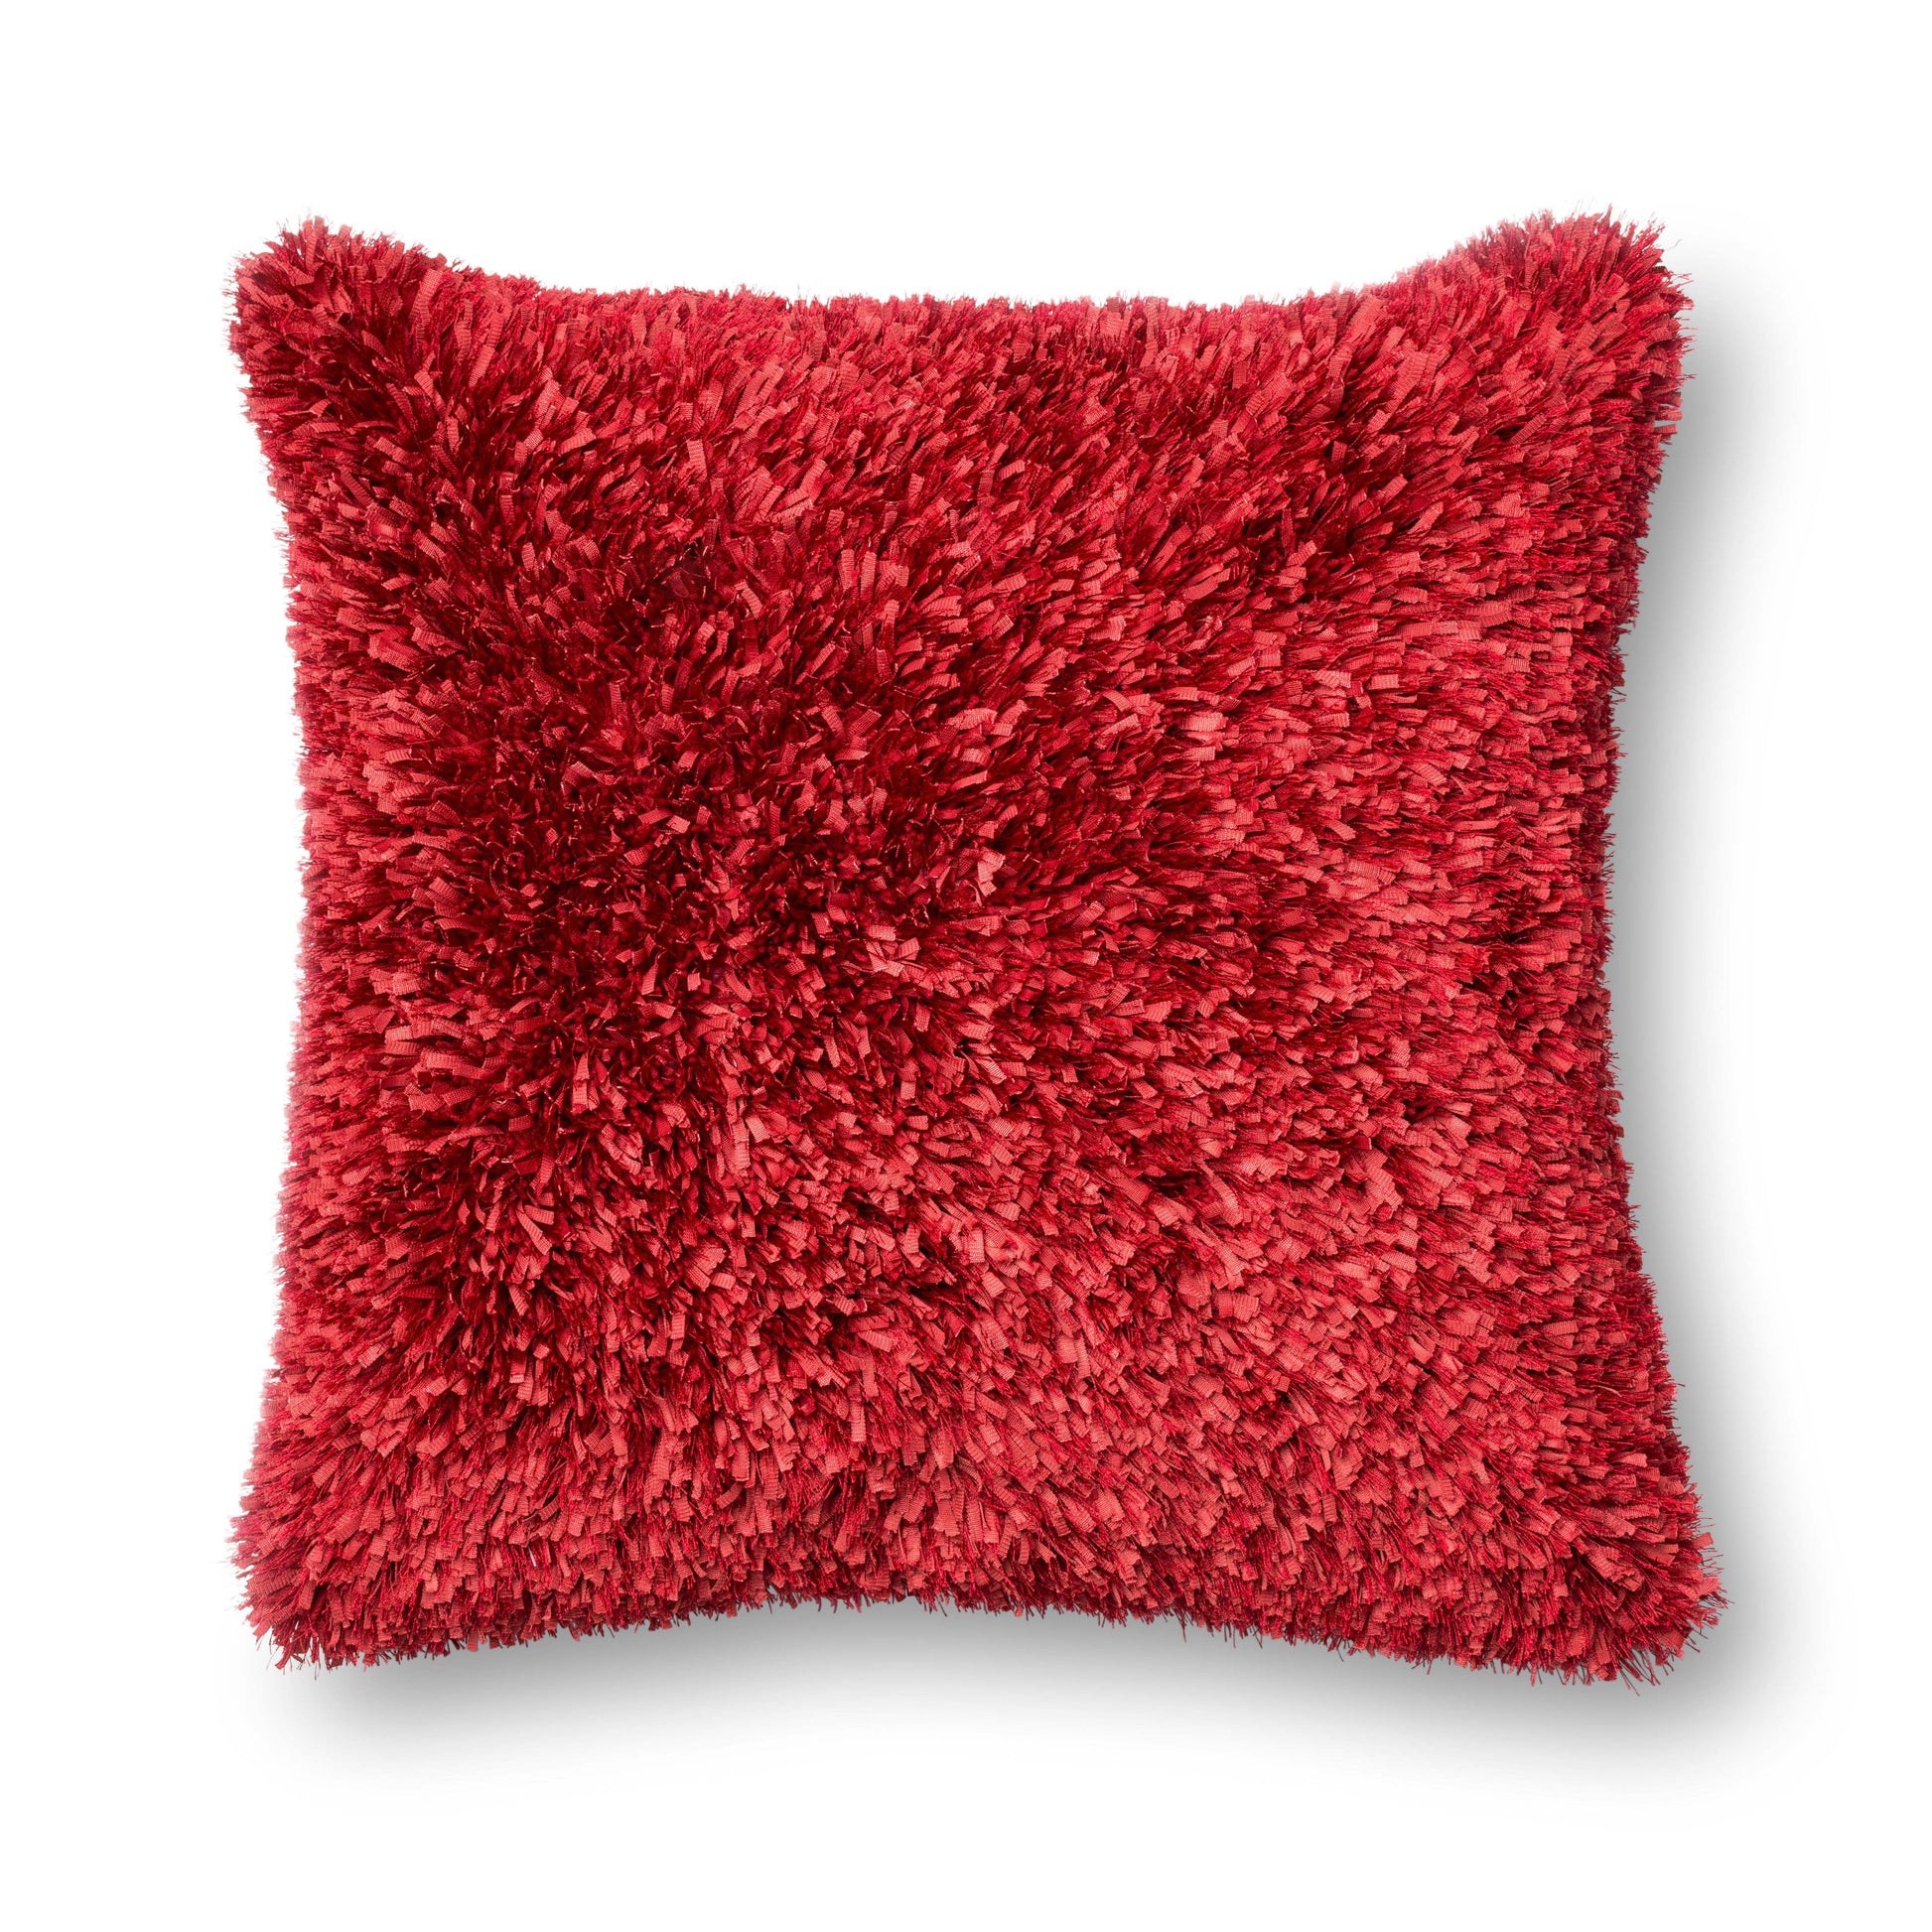 Photo of a pillow;  P0045 Red 13" x 21" Cover w/Poly Pillow